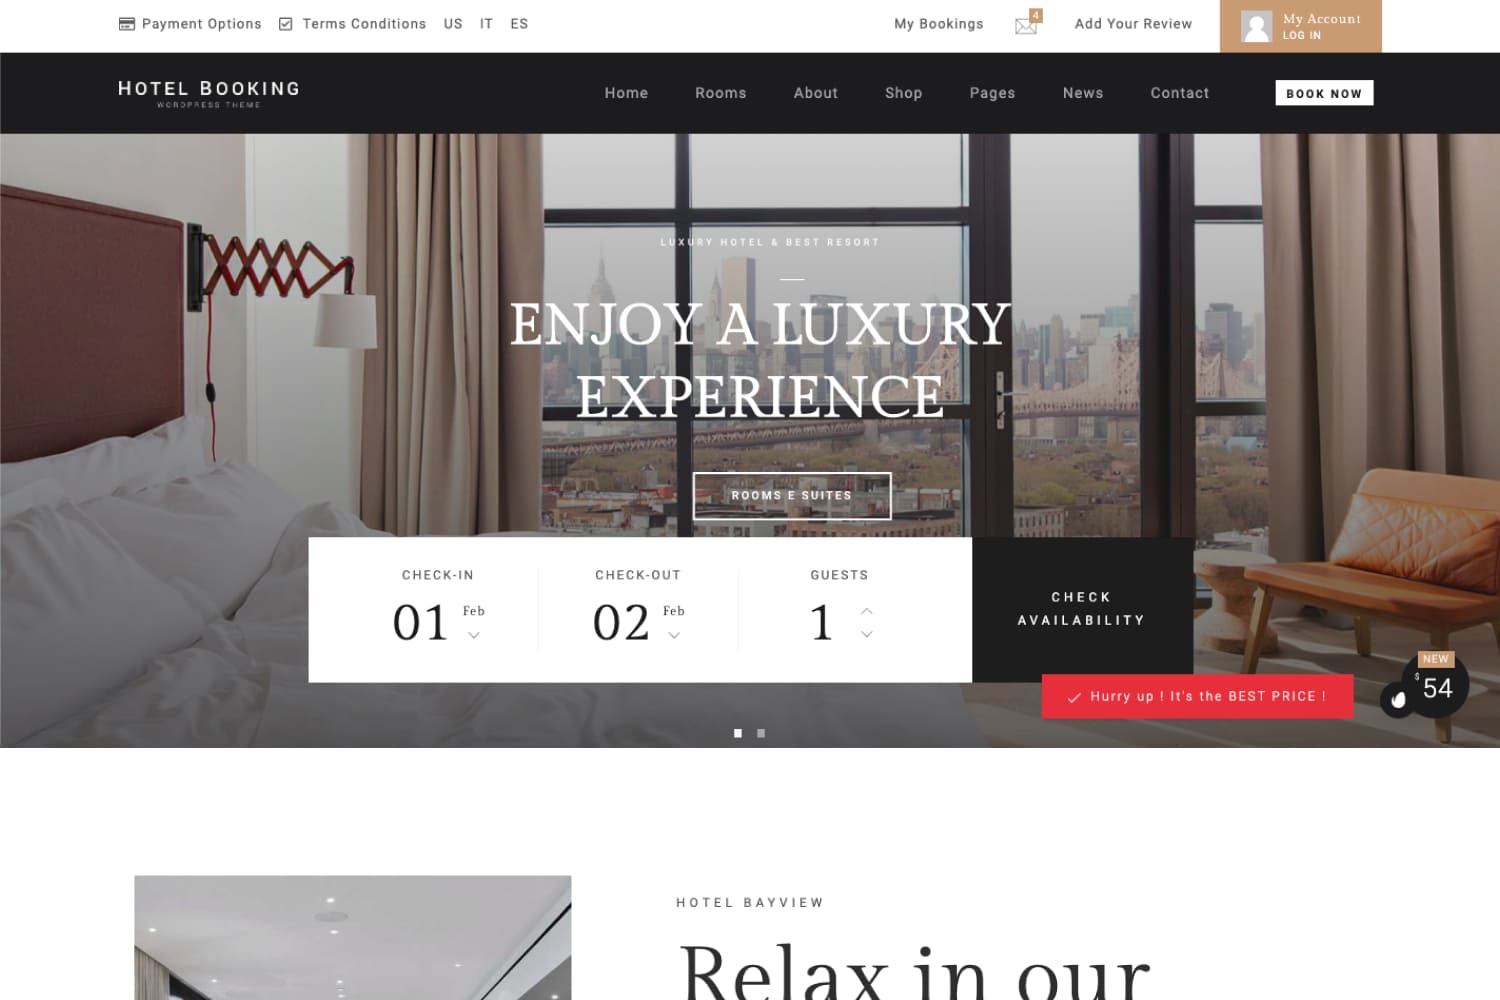 The main page of the hotel website with a photo of the room and the panorama from the window and a large booking block.